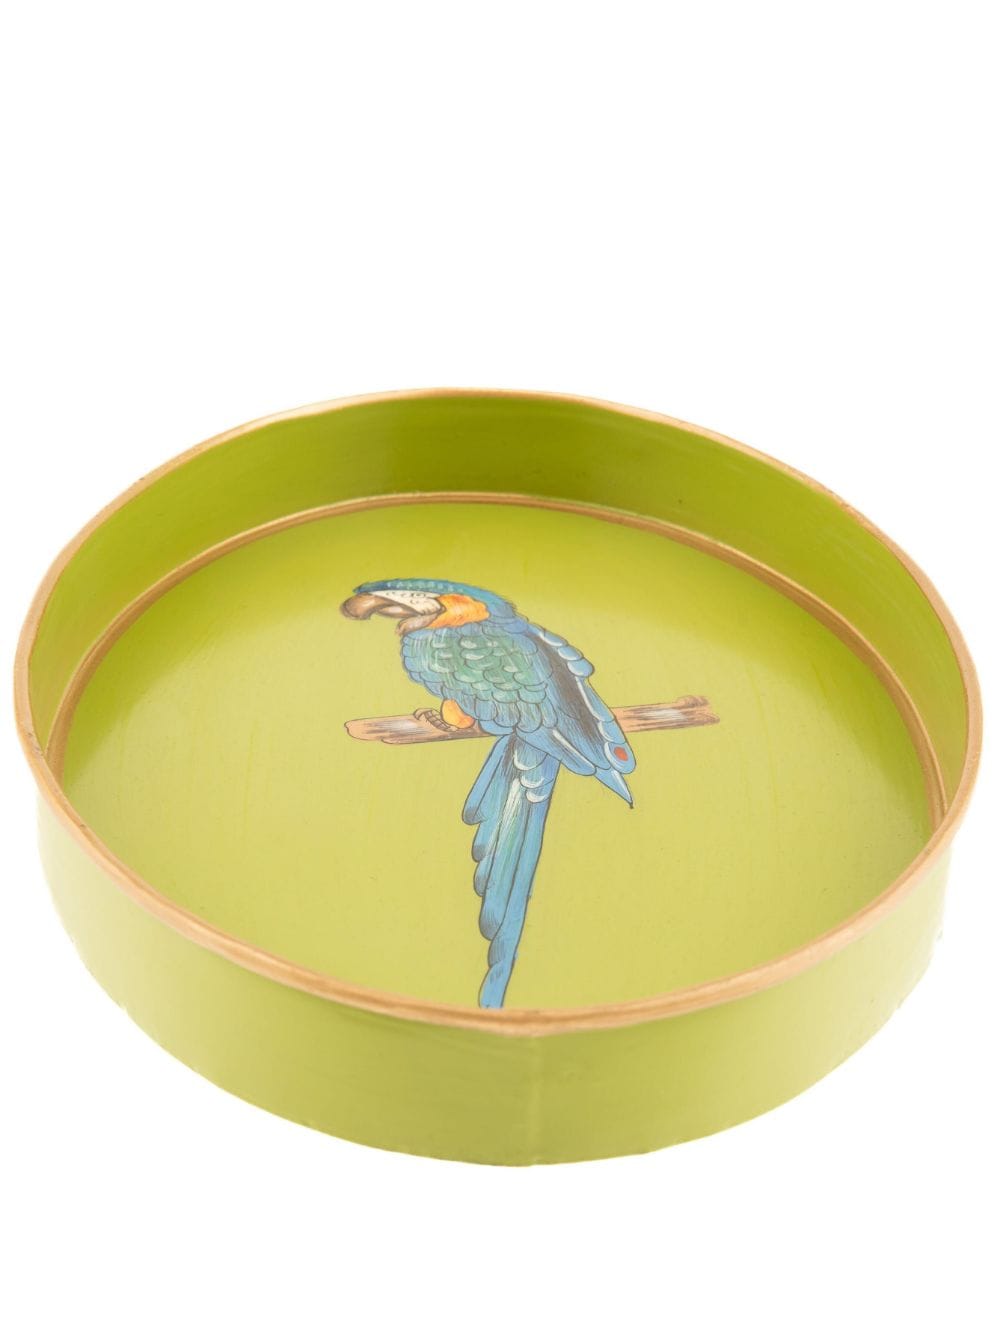 Les-ottomans Fauna Handpainted Oval Tray In Green